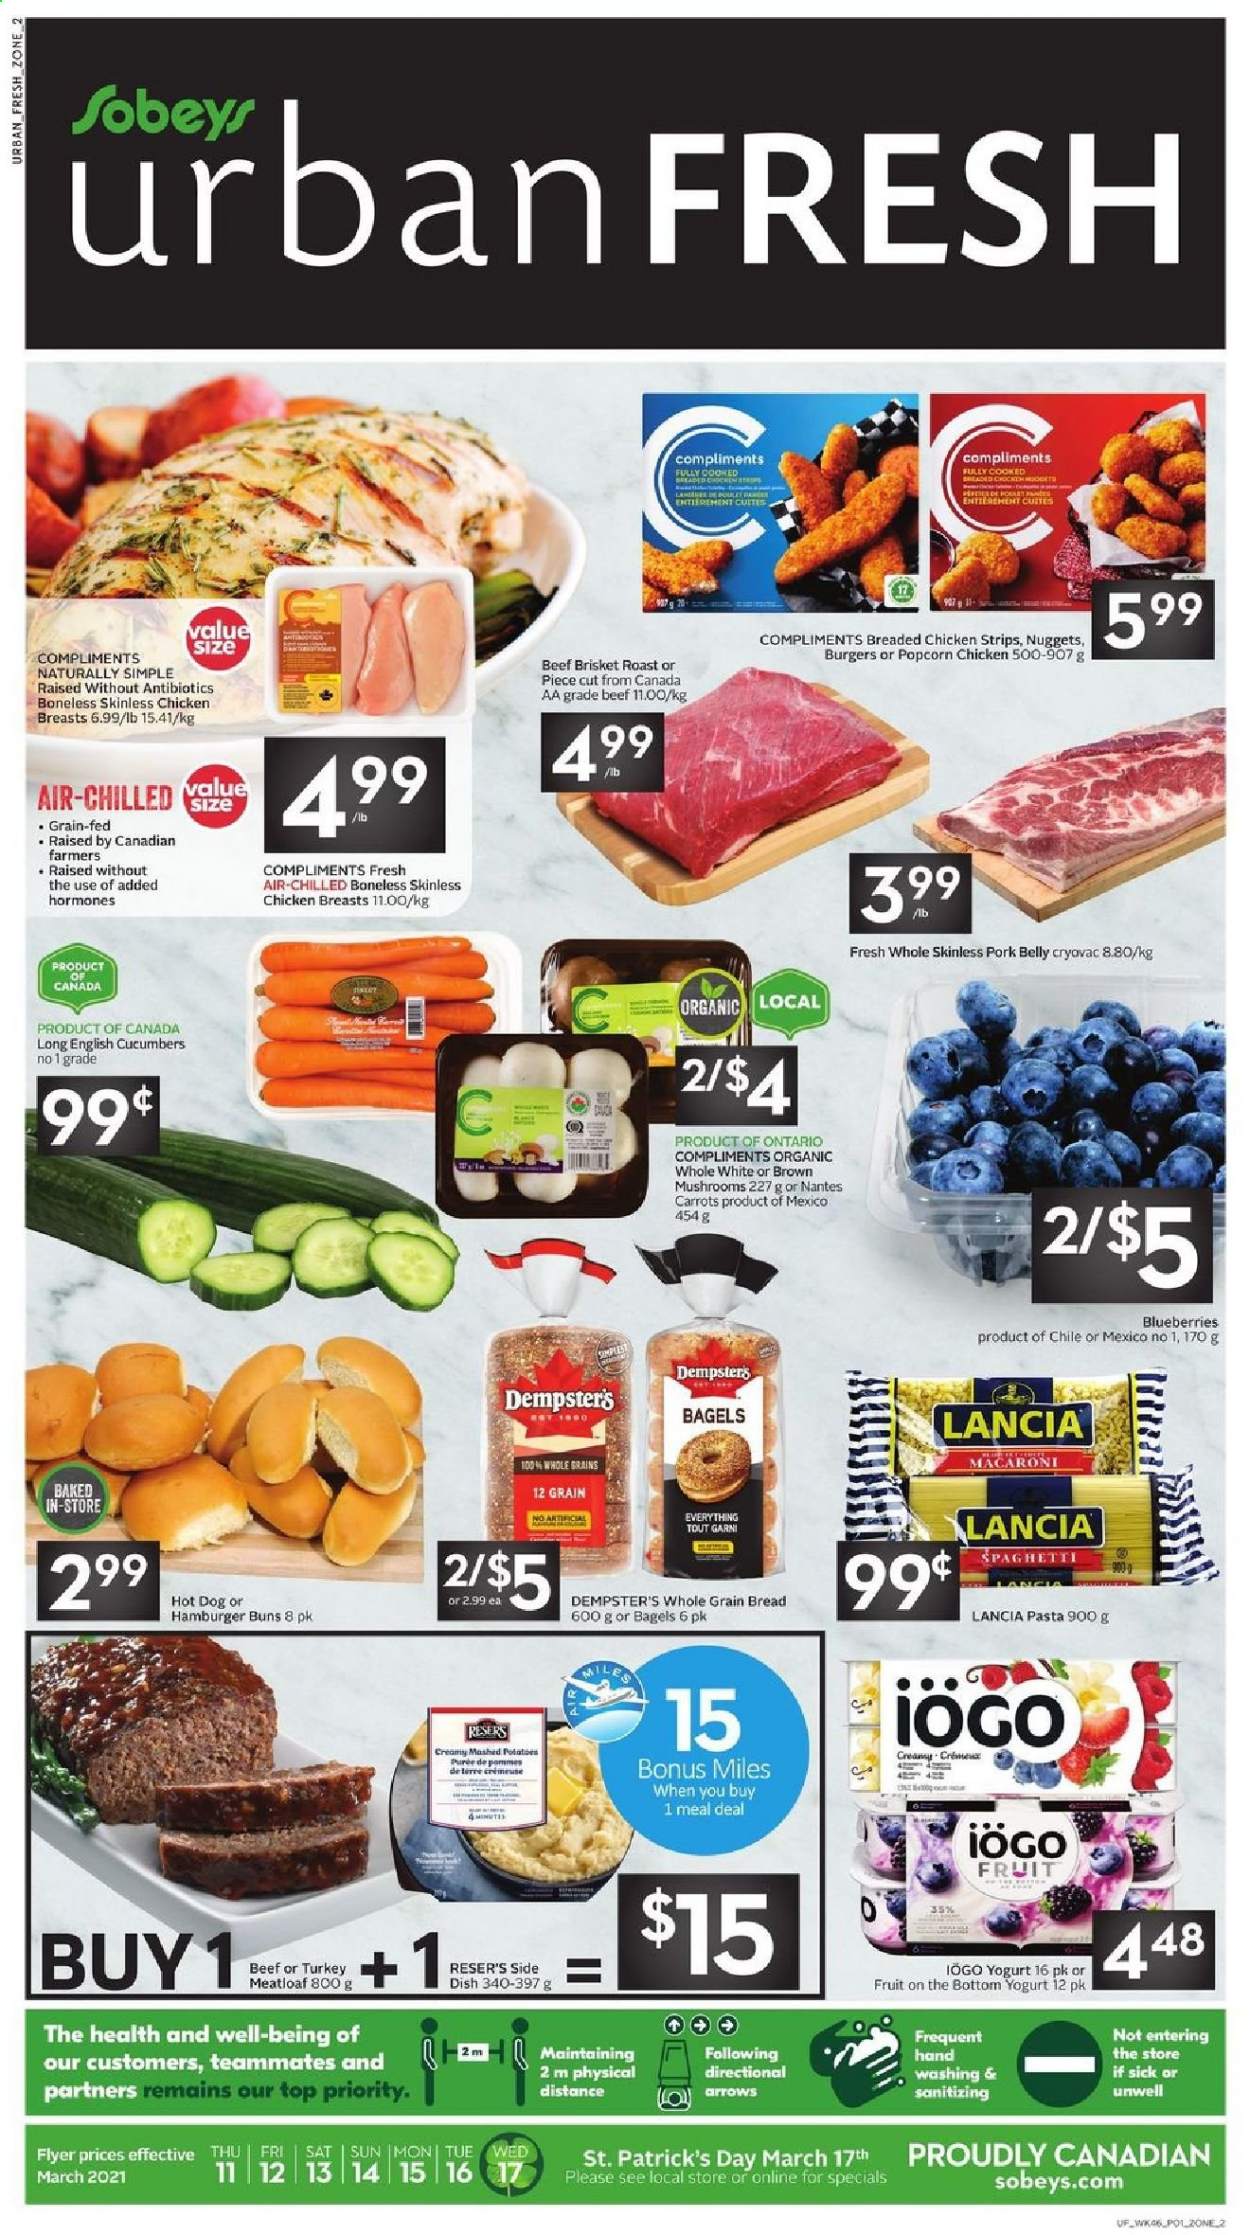 thumbnail - Sobeys Urban Fresh Flyer - March 11, 2021 - March 17, 2021 - Sales products - mushrooms, bagels, bread, buns, burger buns, carrots, cucumber, blueberries, mashed potatoes, spaghetti, hot dog, macaroni, nuggets, pasta, fried chicken, meatloaf, yoghurt, strips, chicken strips, popcorn, beef meat, beef brisket, pork belly, pork meat. Page 1.